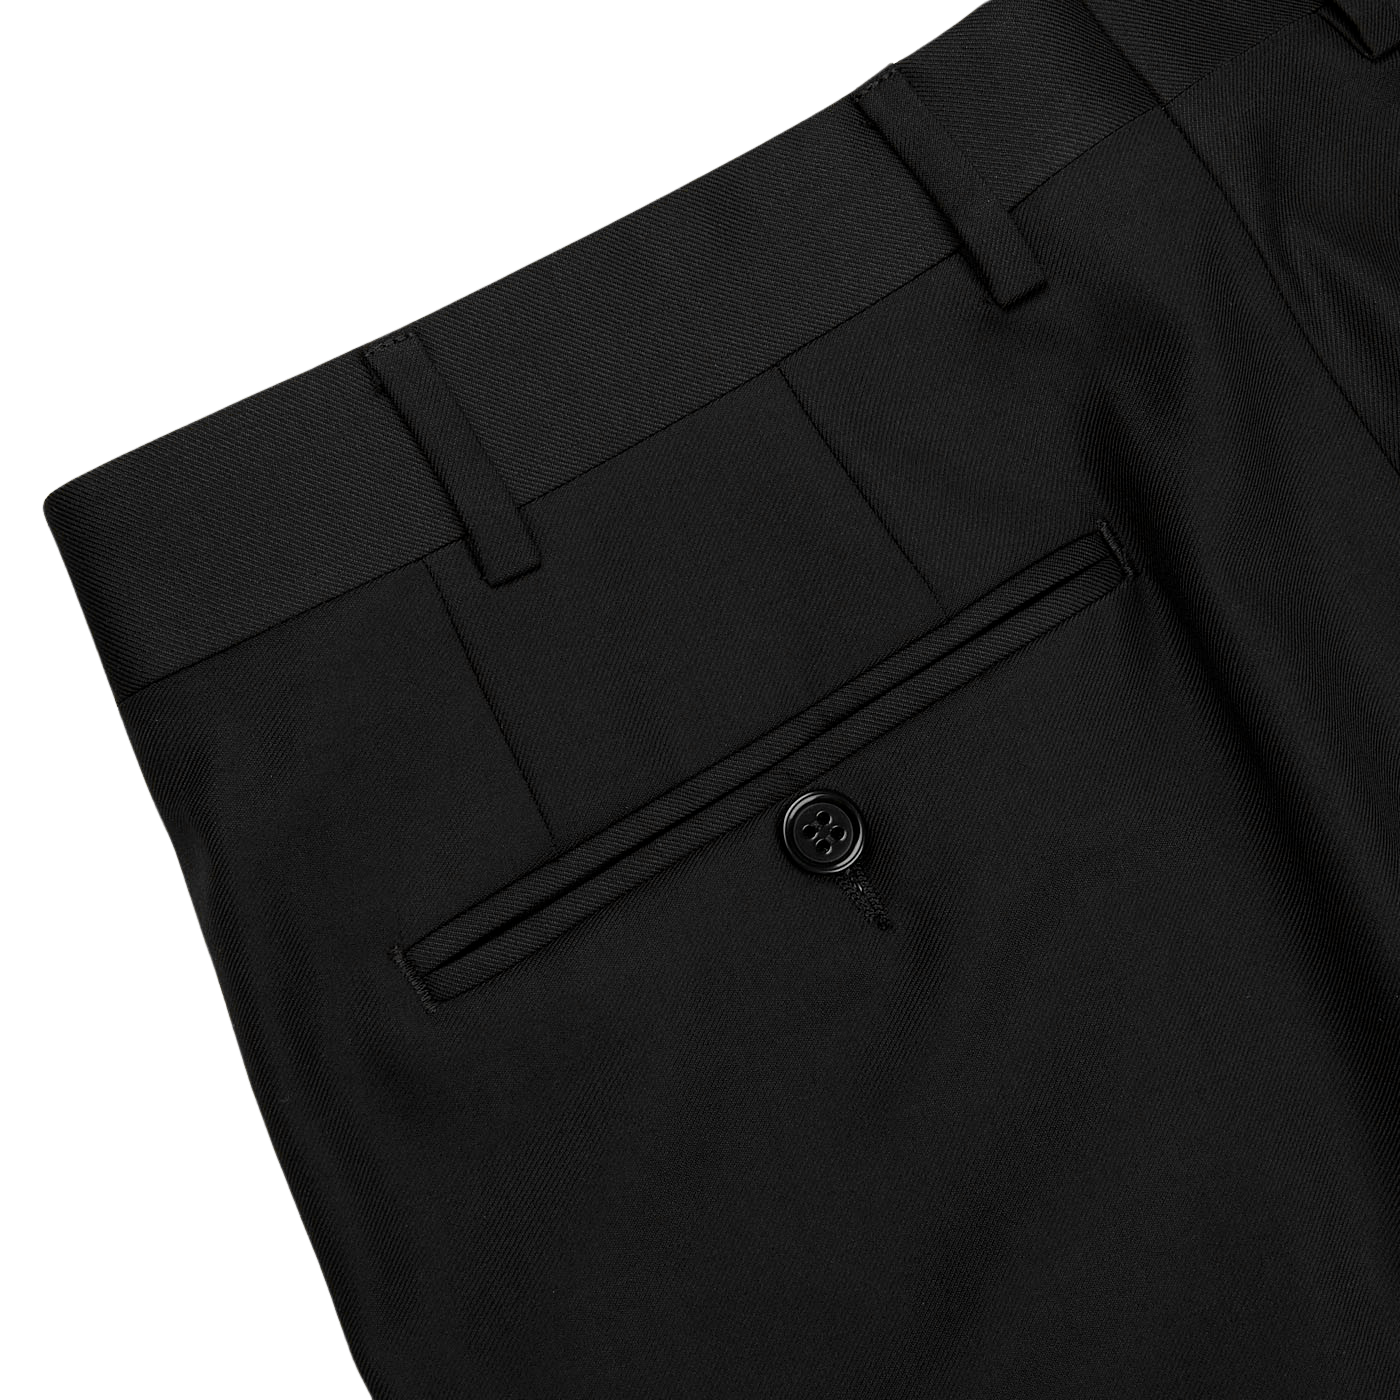 A classic close-up of Canali's Black Virgin Wool Twill Suit tuxedo pants for men.